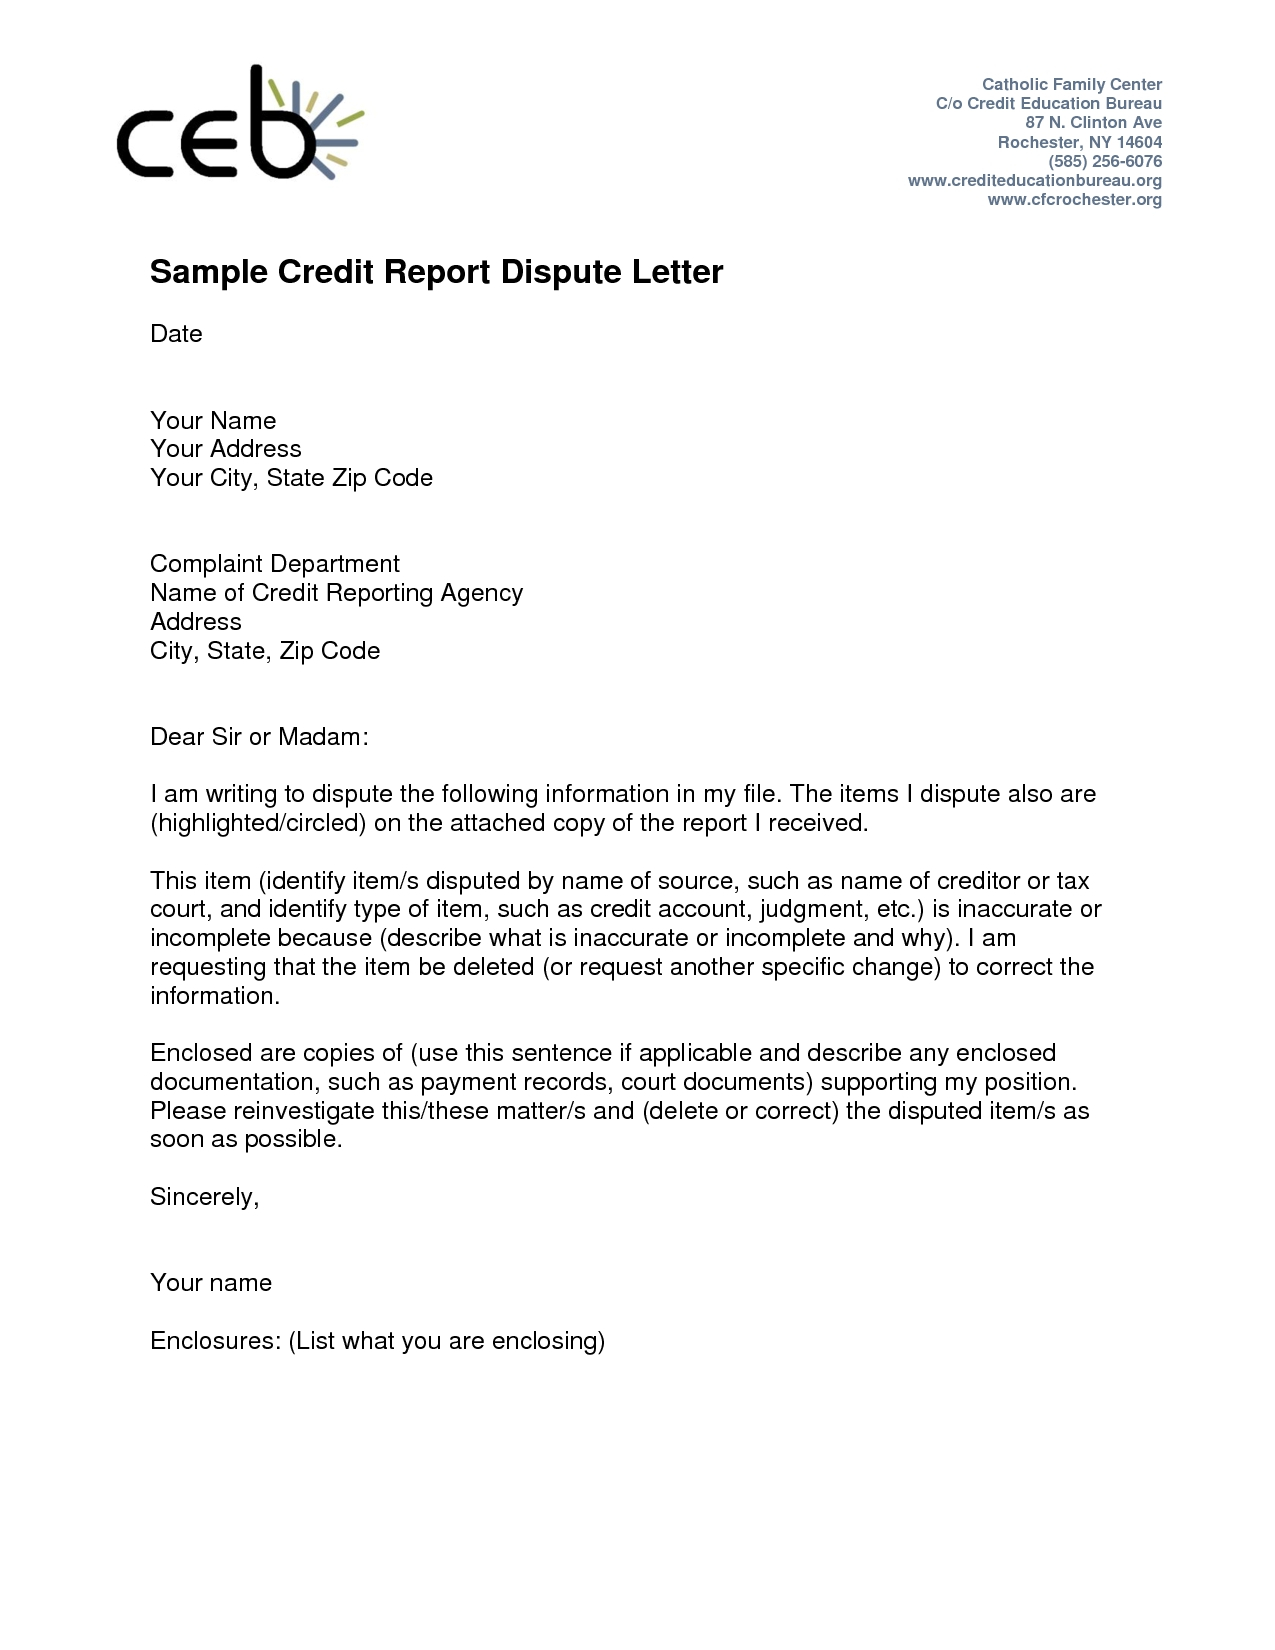 Credit Card Settlement Letter Template - Credit Dispute Letter Templates Acurnamedia